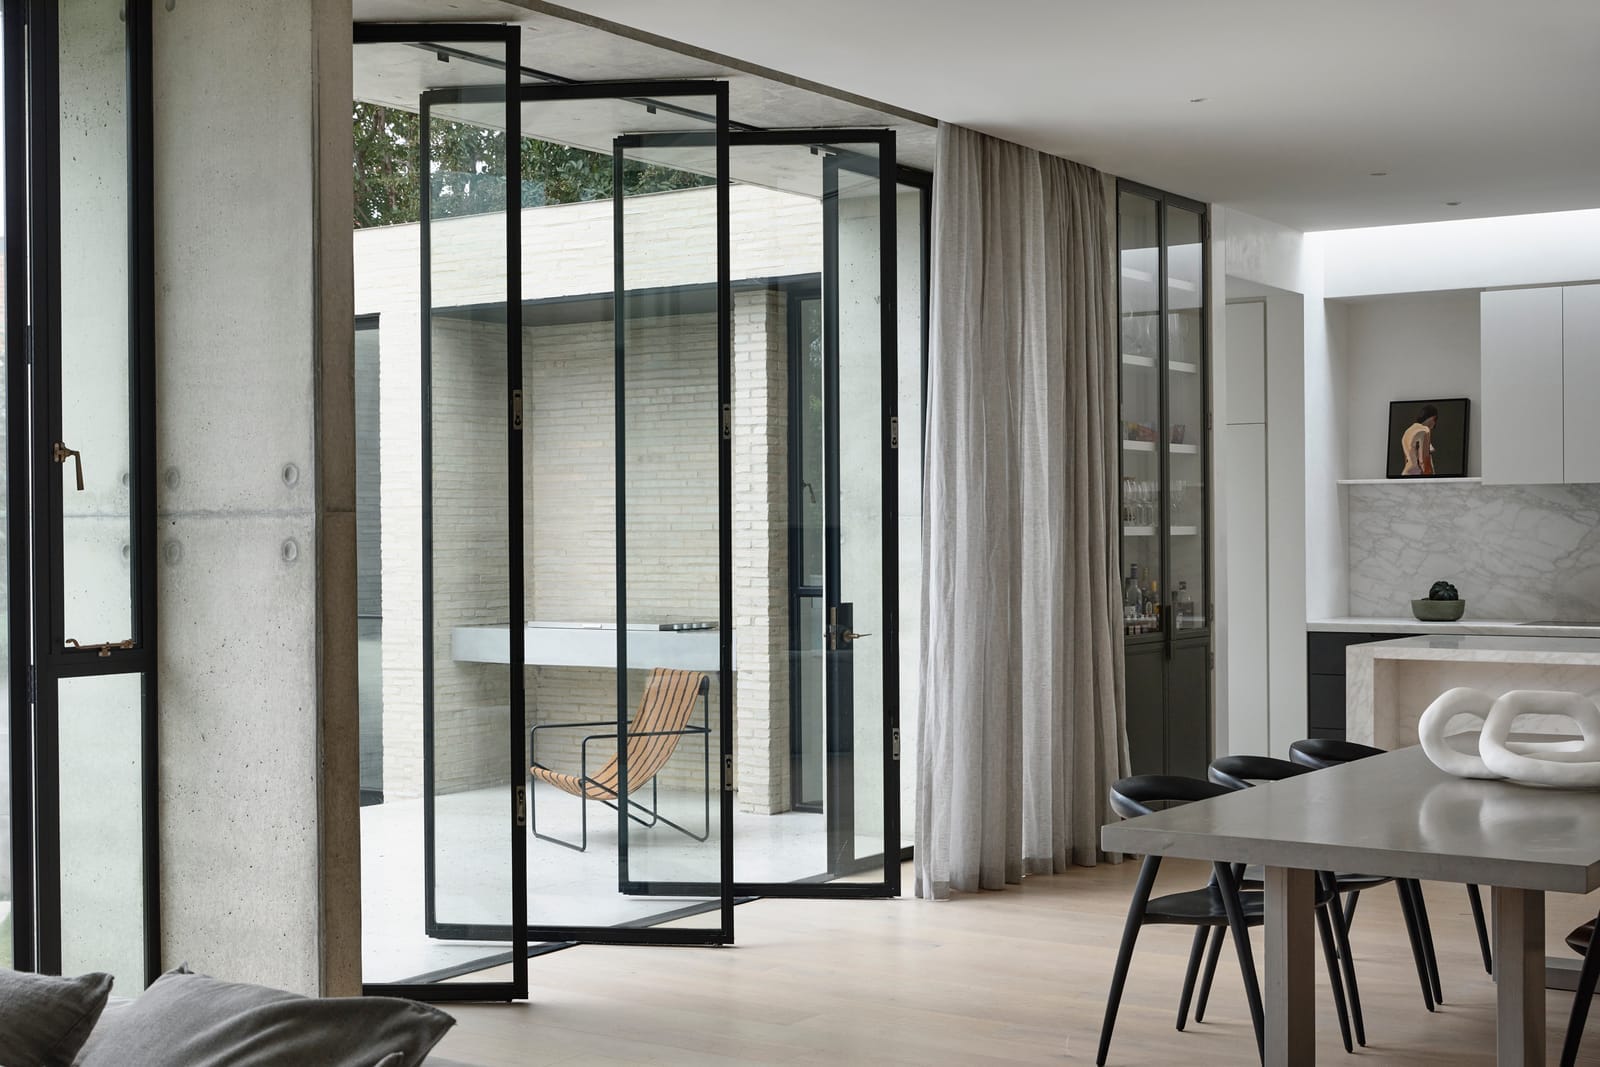 RE Residence by Inglis Architects.iew from the inside looking out through black-framed glass doors onto a patio. The doors are ajar, allowing a glimpse of a comfortable chair on the patio. Inside, the focus is on a dining area with a dark wooden table and black chairs, complemented by the same sheer curtains as the top view, tying the two spaces together visually.